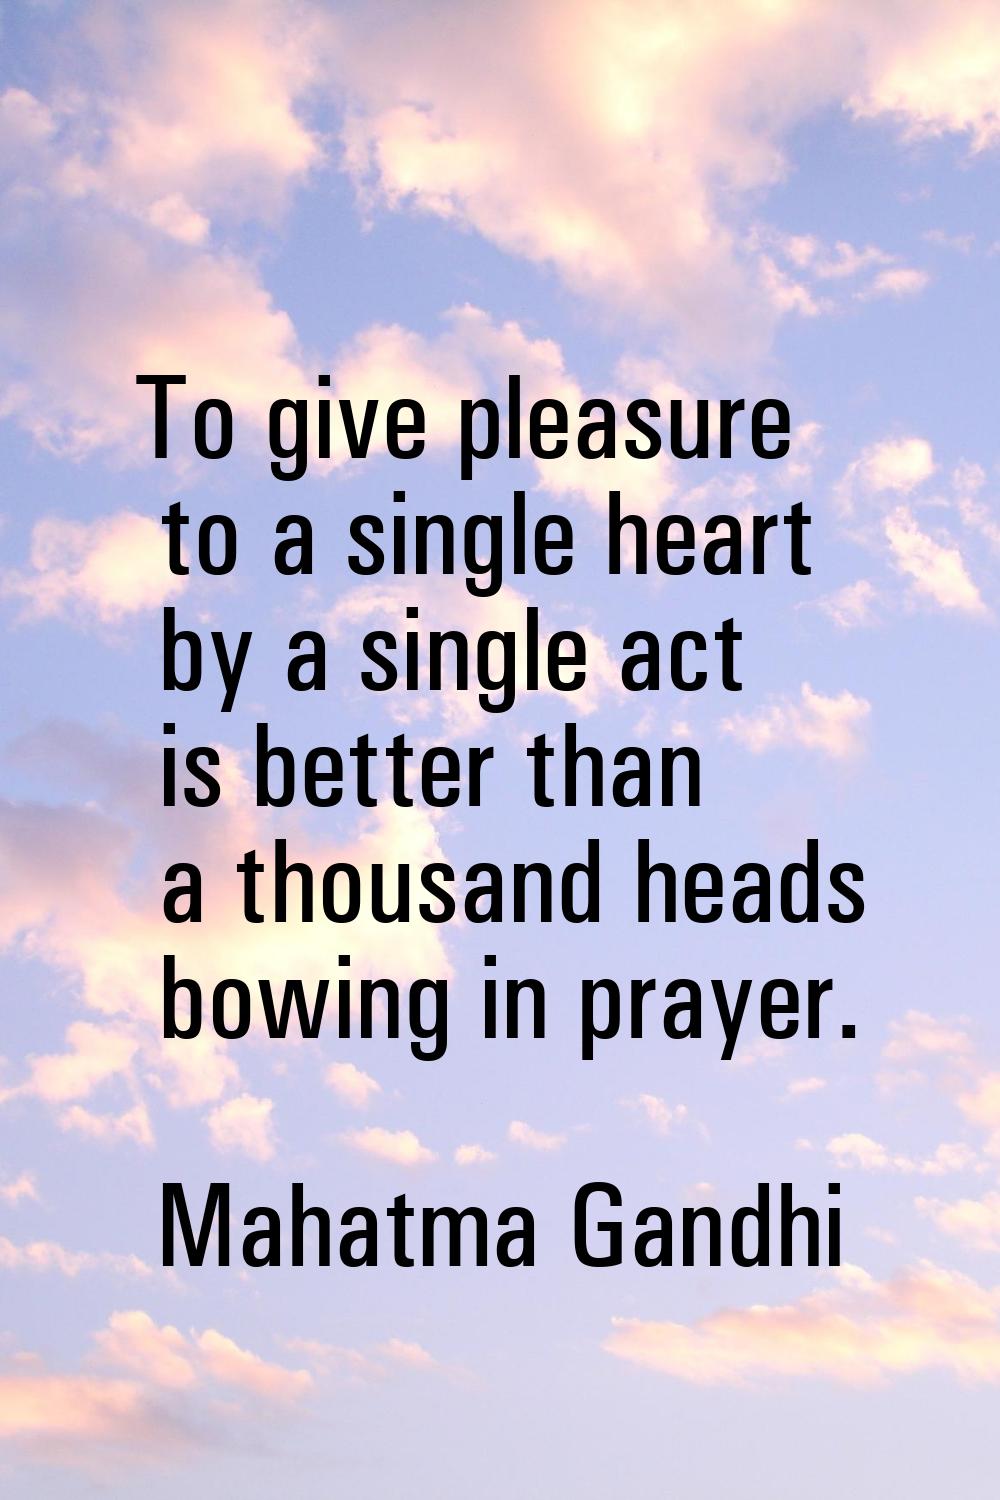 To give pleasure to a single heart by a single act is better than a thousand heads bowing in prayer